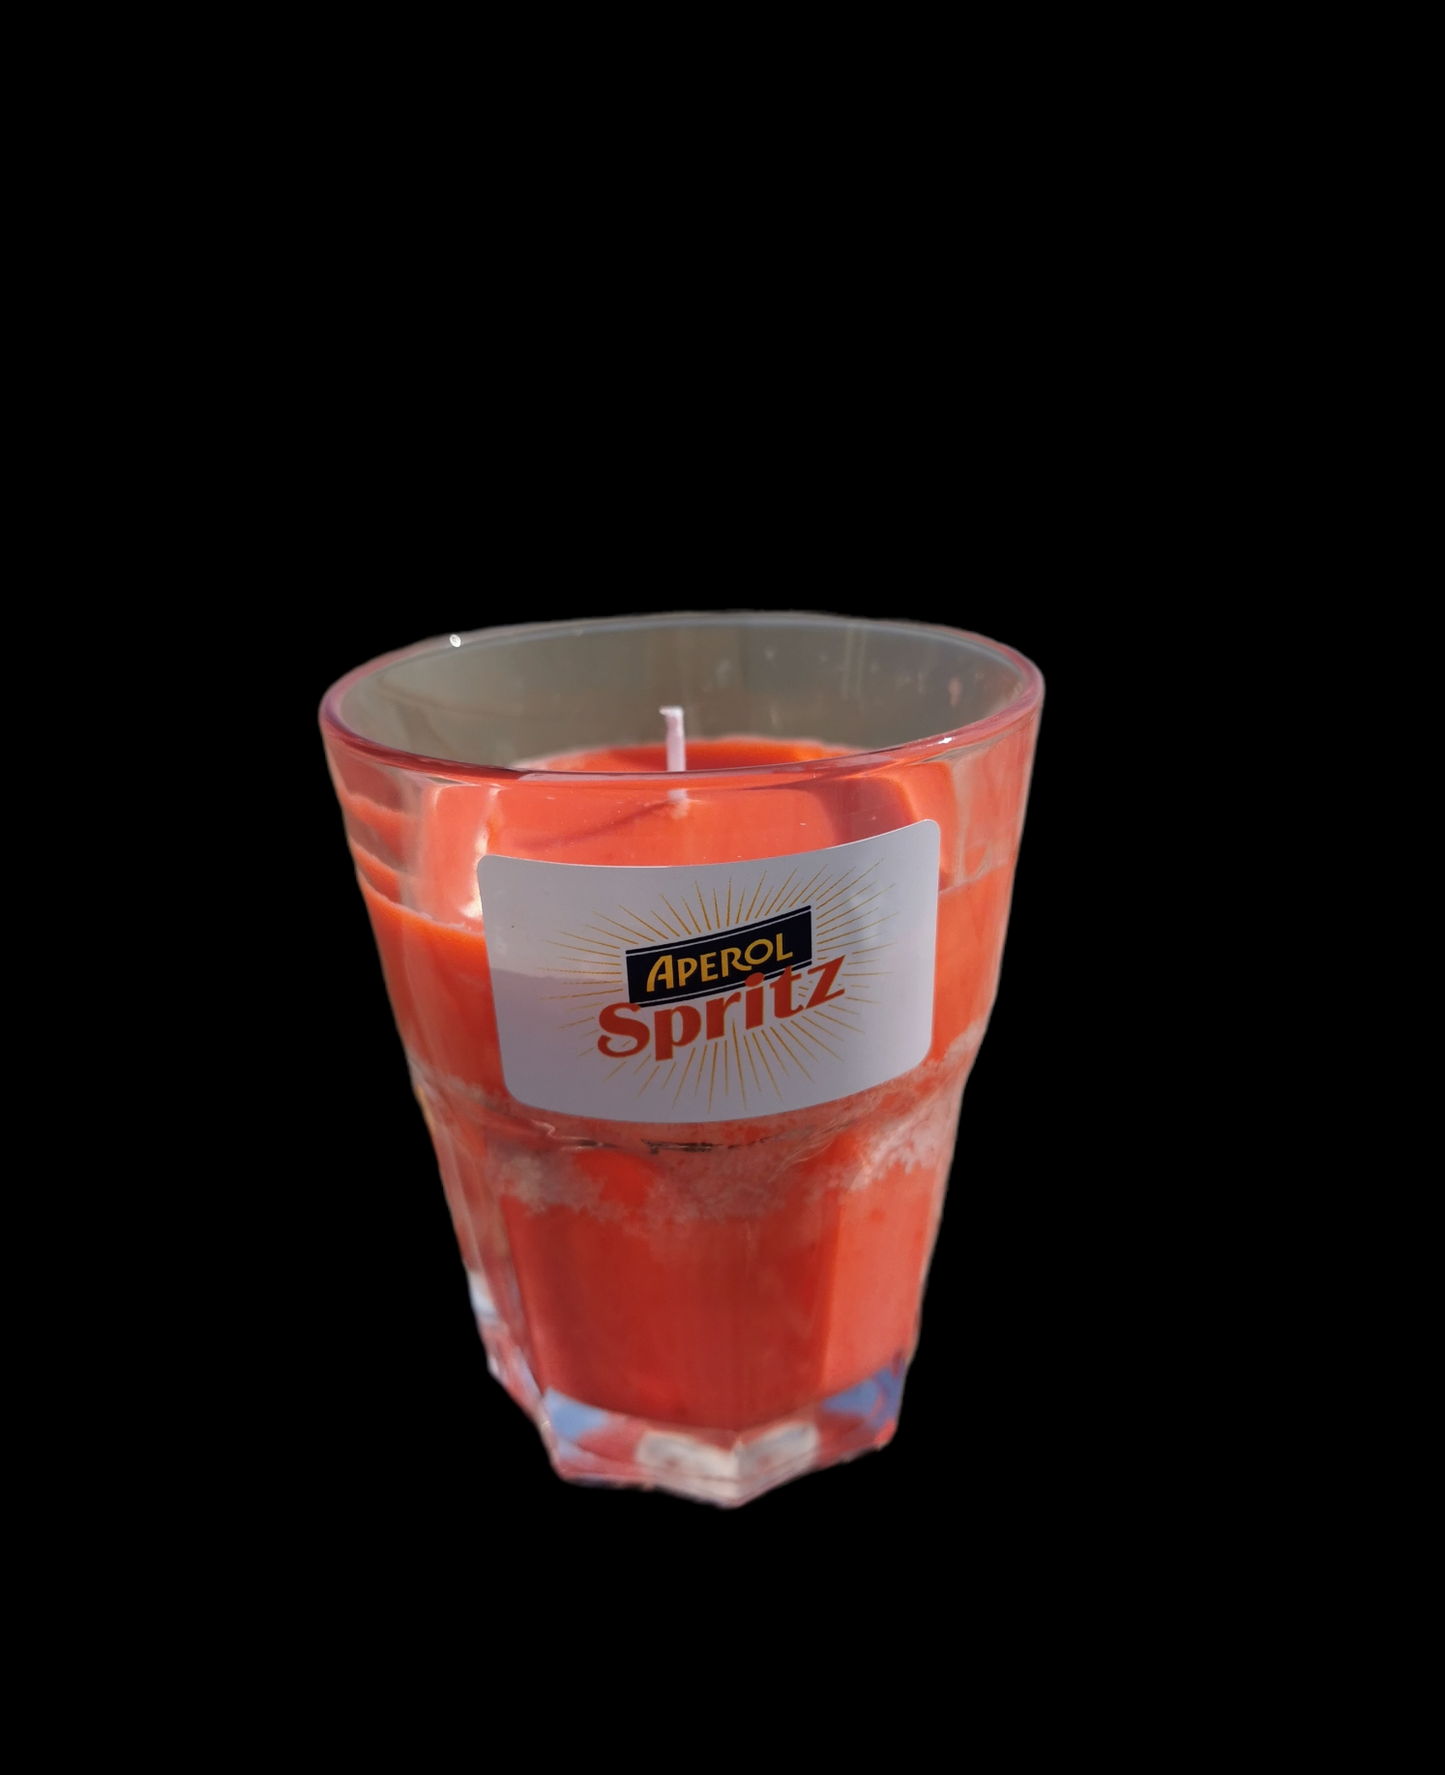 Spritz scented candle